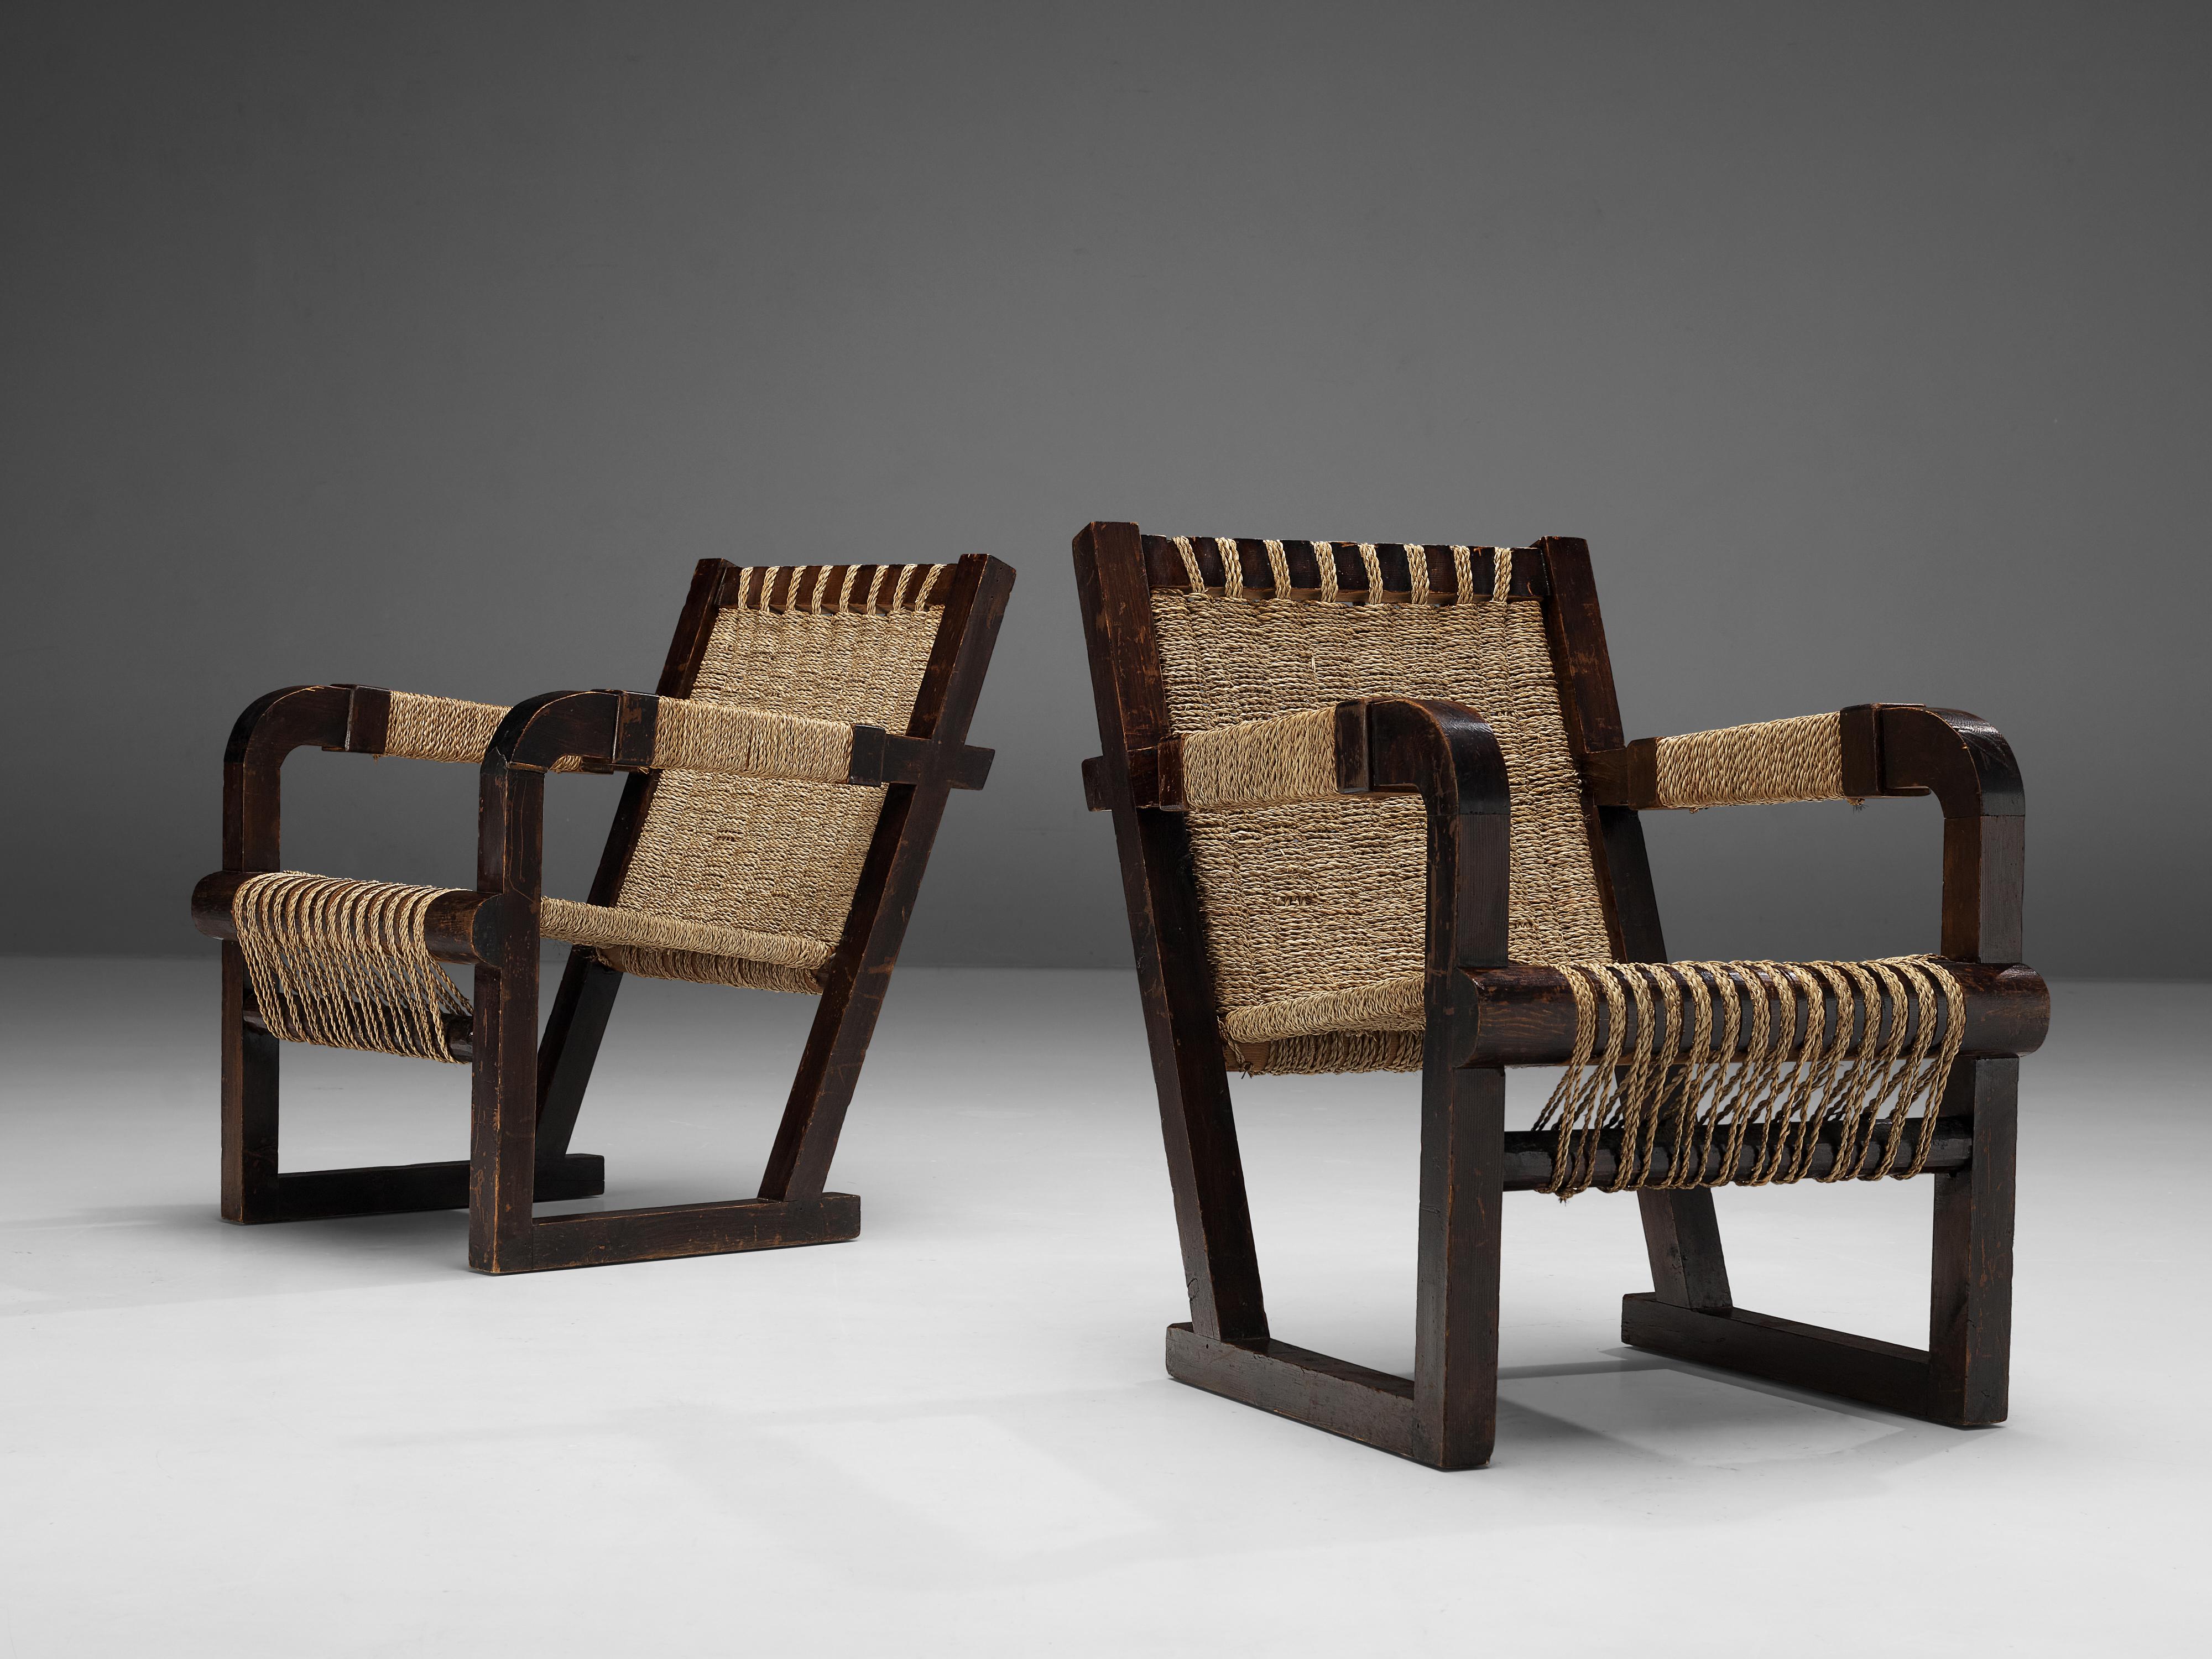 French Francis Jourdain Pair of Lounge Chair with Woven Details